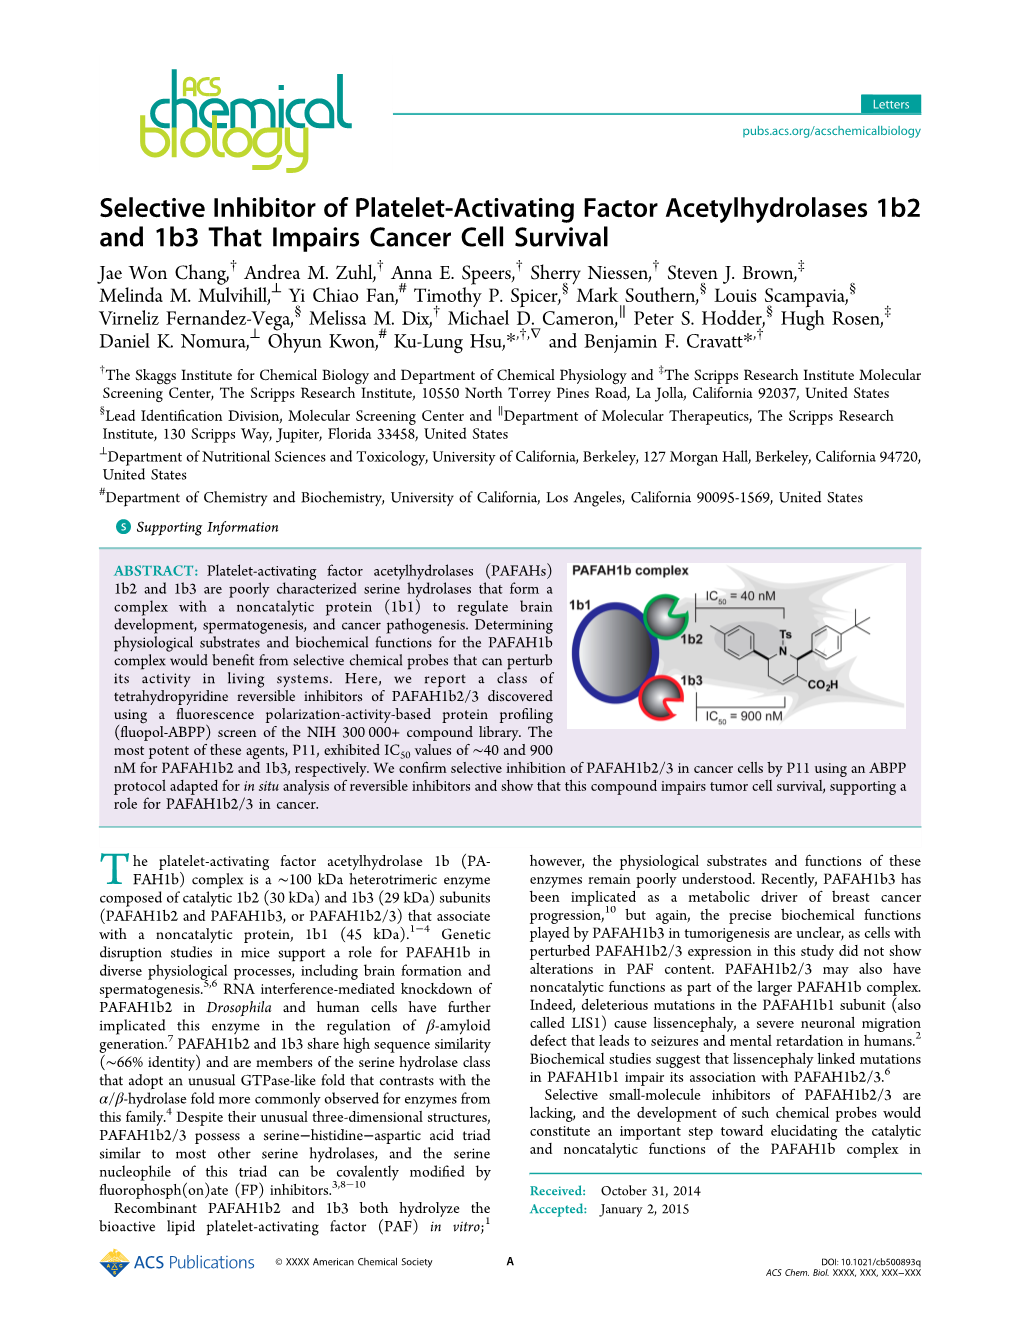 Selective Inhibitor of Platelet-Activating Factor Acetylhydrolases 1B2 and 1B3 That Impairs Cancer Cell Survival † † † † ‡ Jae Won Chang, Andrea M